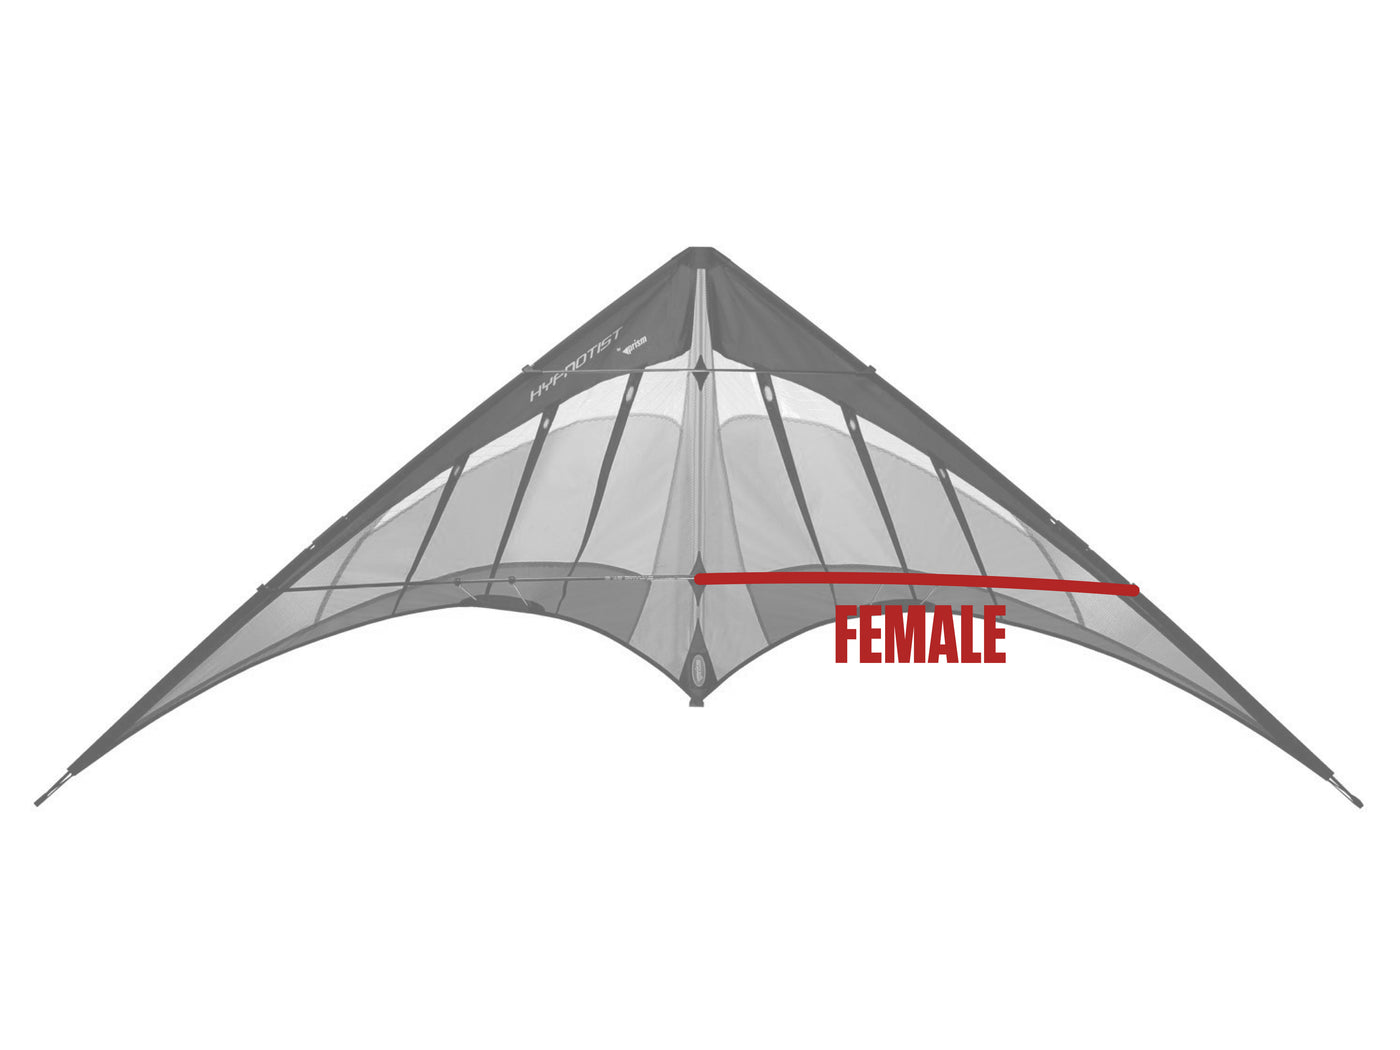 Diagram showing location of the Hypnotist Lower Spreader Female on the kite.